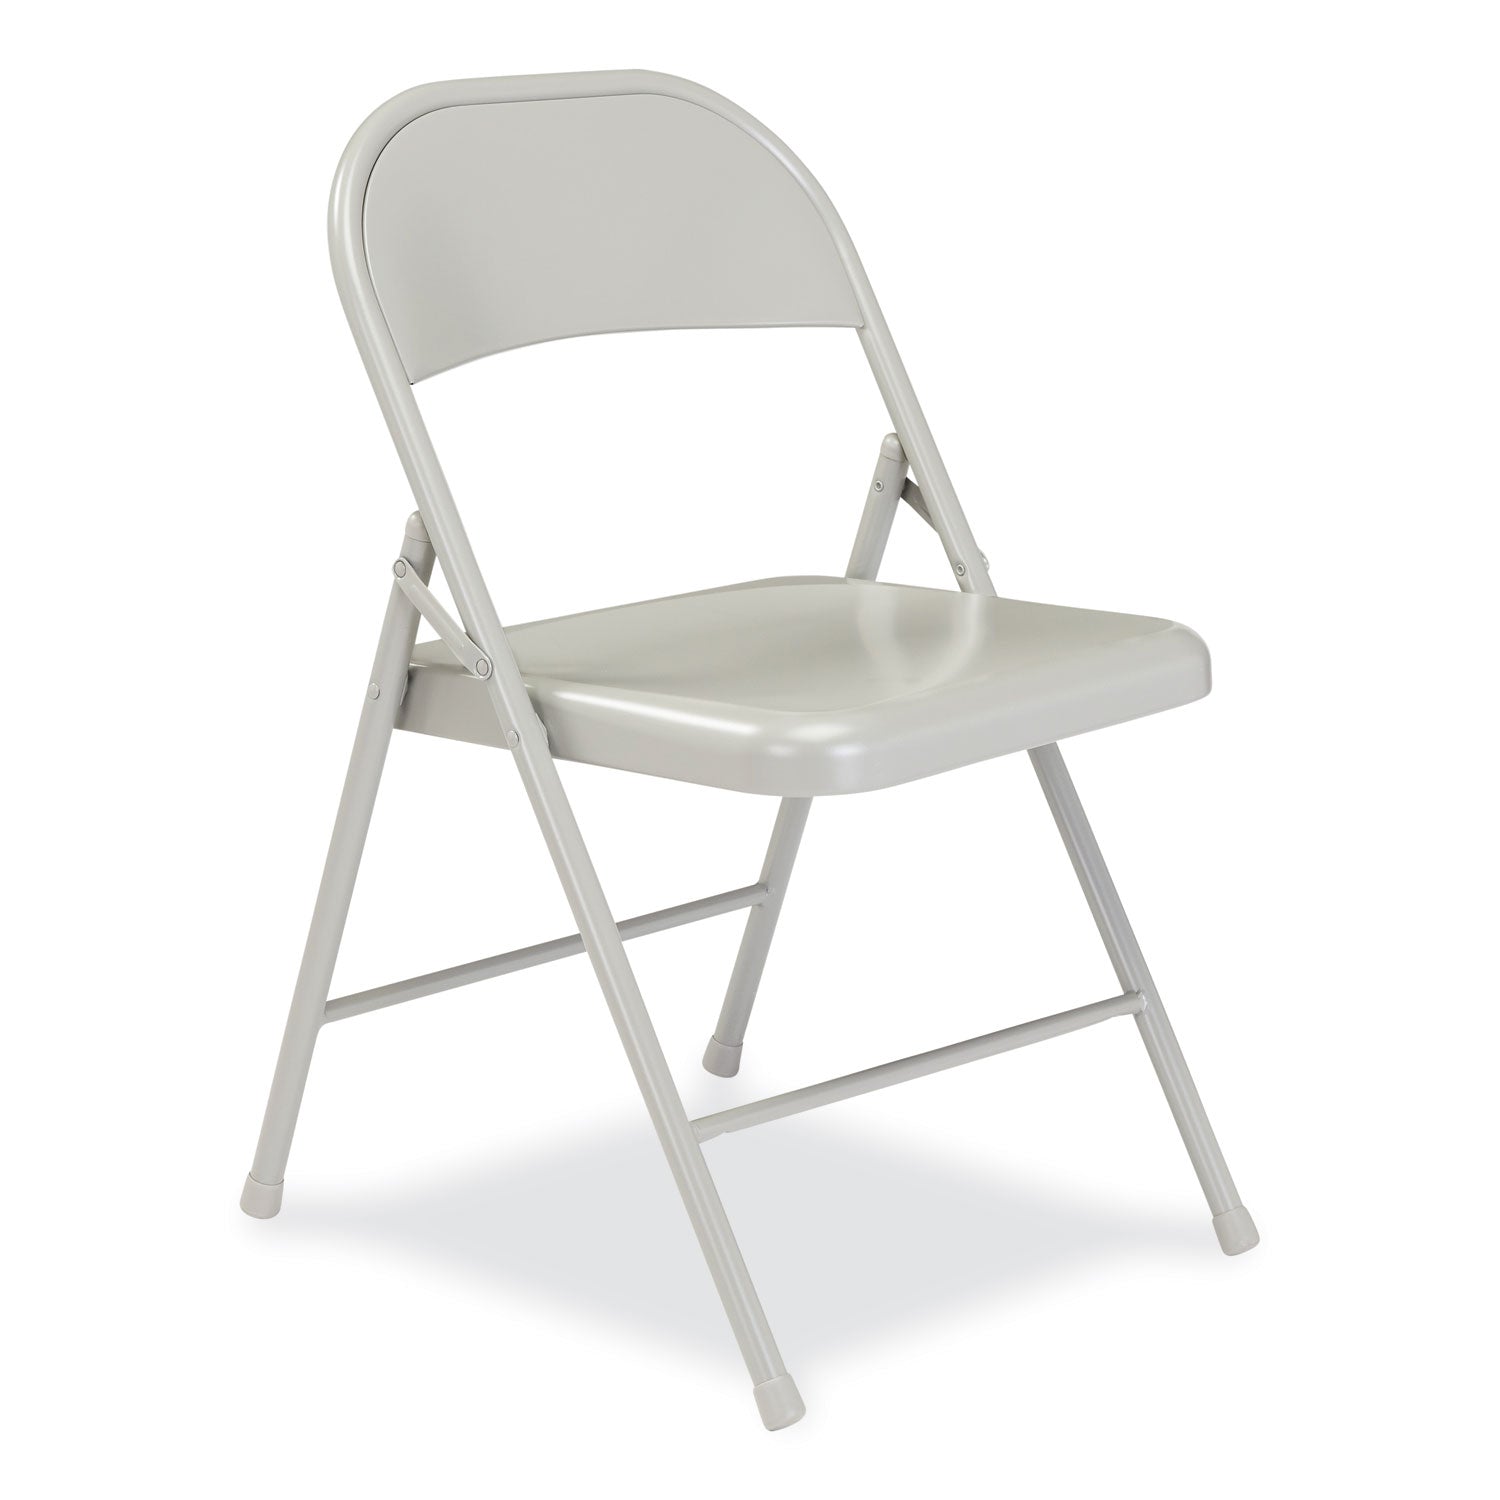 900-series-all-steel-folding-chair-supports-250-lb-1775-seat-height-gray-seat-back-base-4-ctships-in-1-3-business-days_nps902 - 2